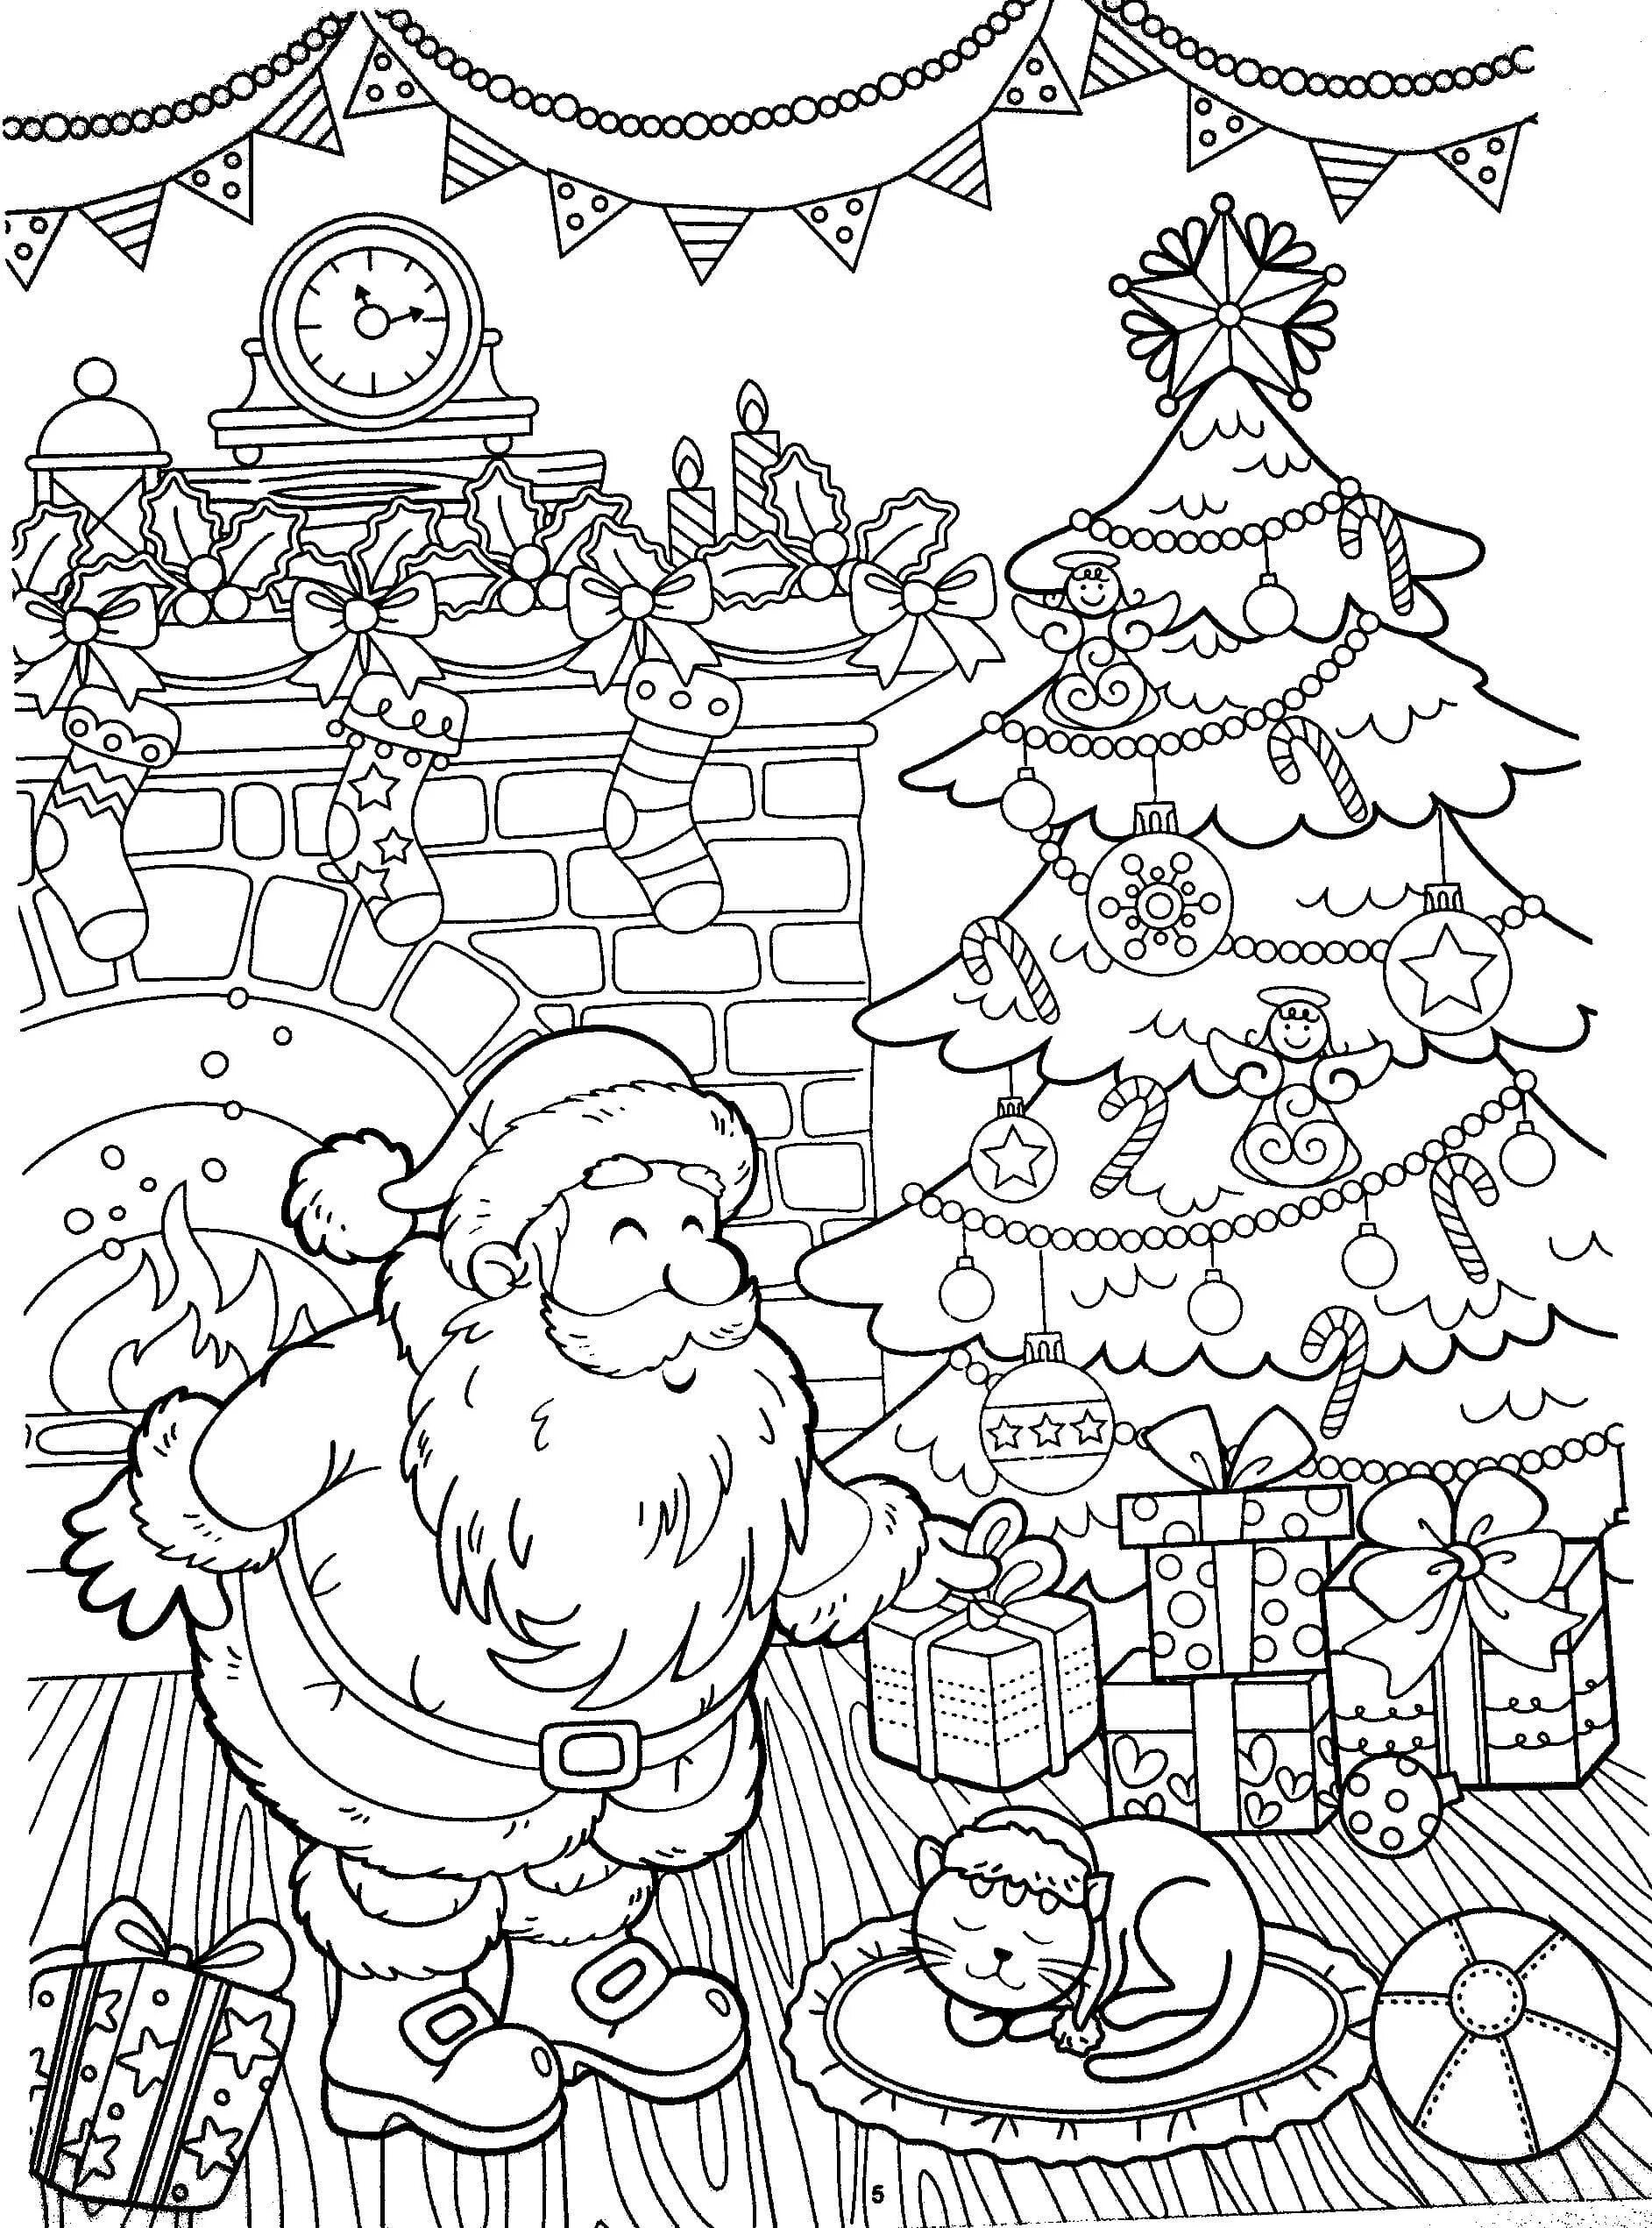 Santa Claus and Christmas tree for kids #3